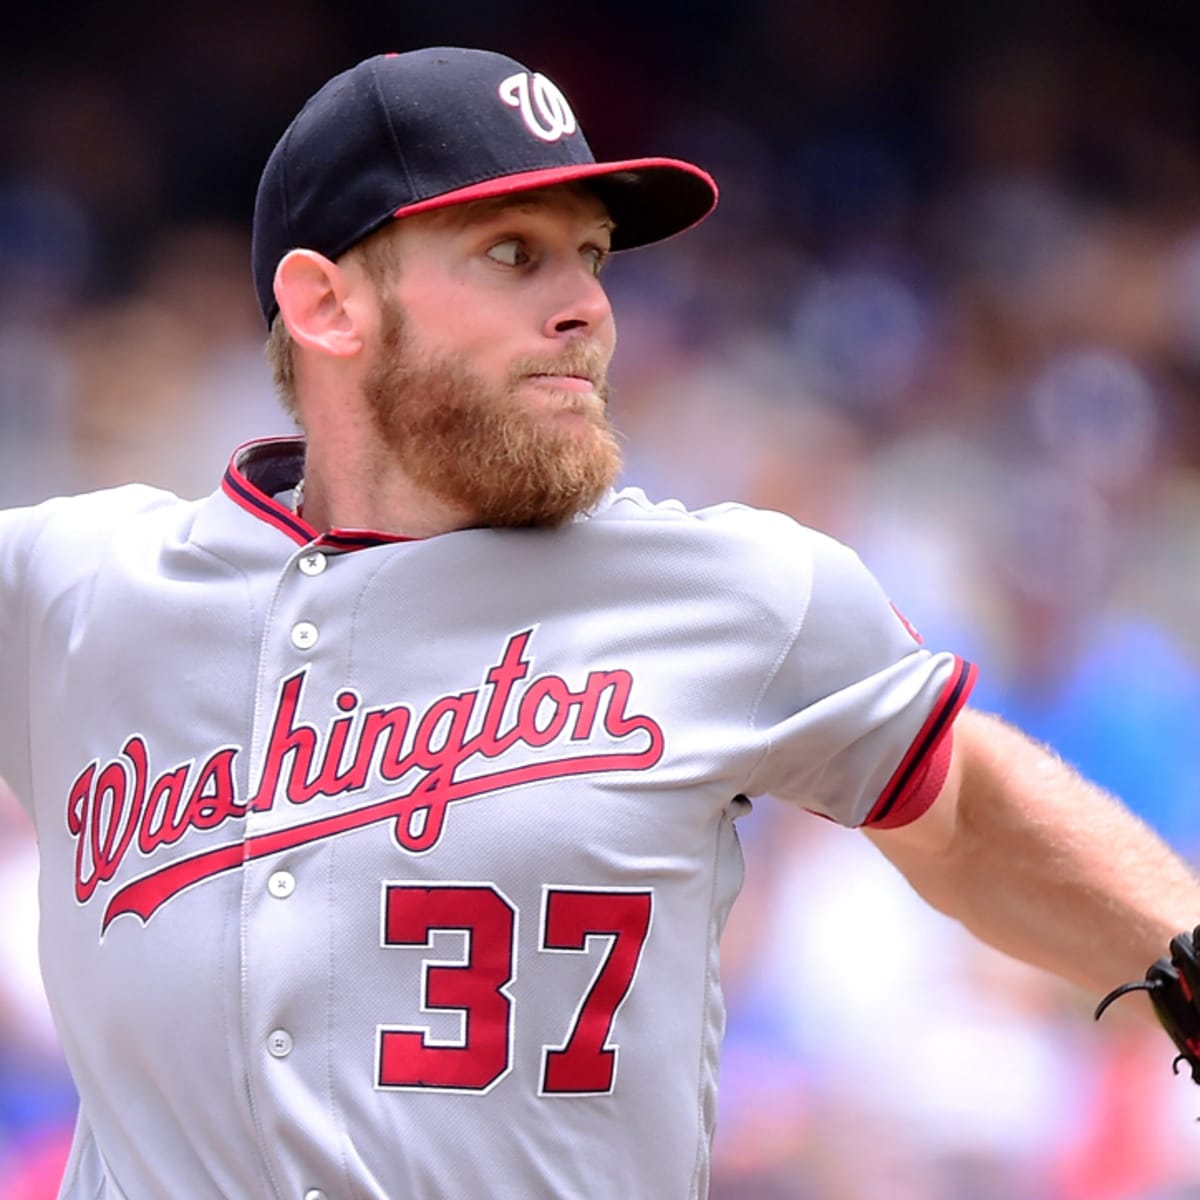 Max Scherzer's arrival was key for Stephen Strasburg and the